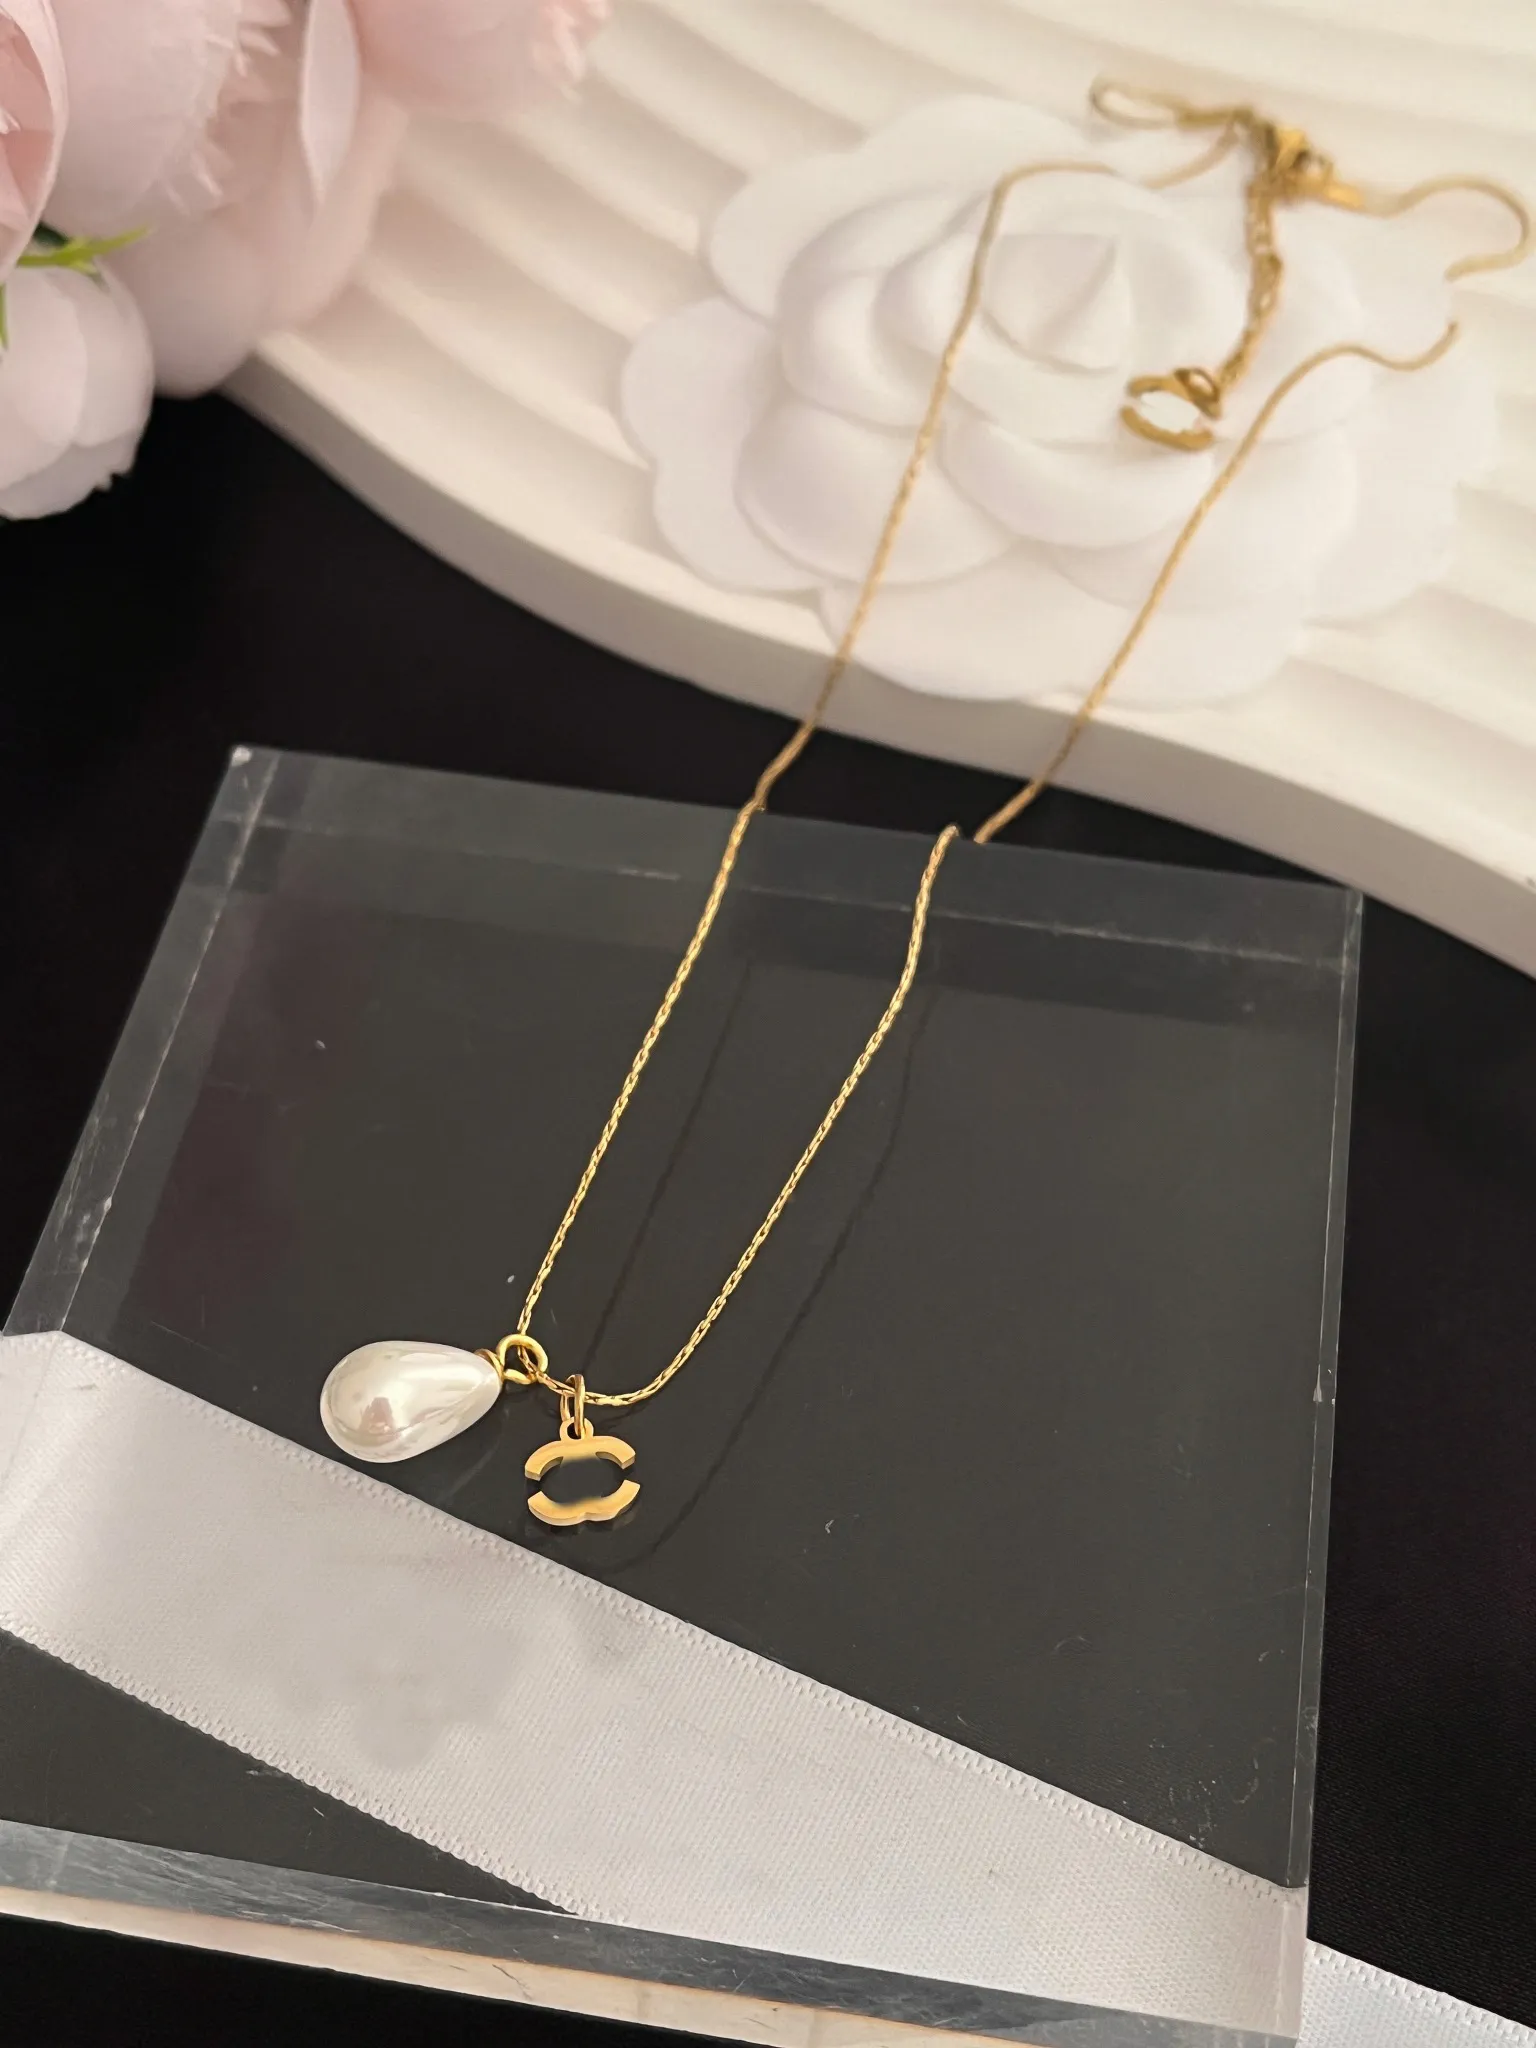 New Style Designer Pearl Pendant Necklaces Famous Women Brand Double Letter Stainless Steel Necklace 18K Gold Plated Clavicular Chain Fashion Jewelry Gift